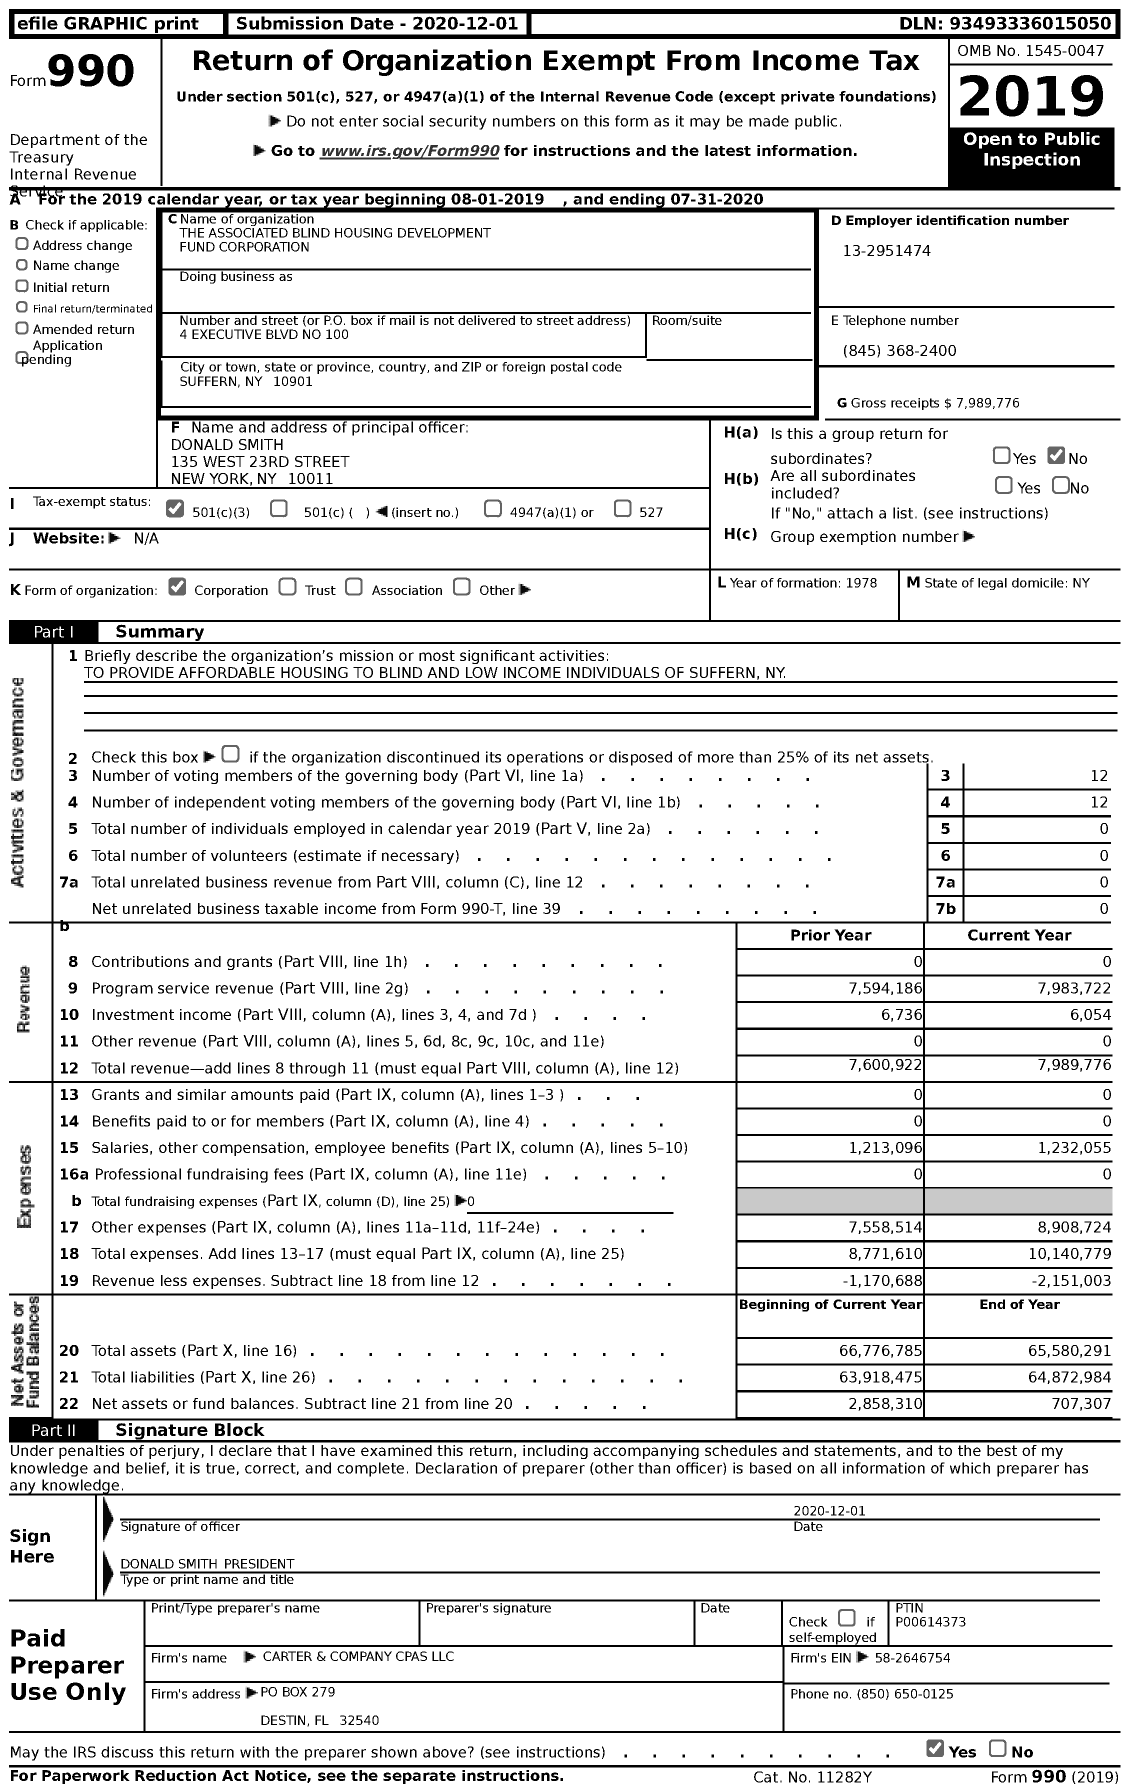 Image of first page of 2019 Form 990 for The Associated Blind Housing Development Fund Corporation